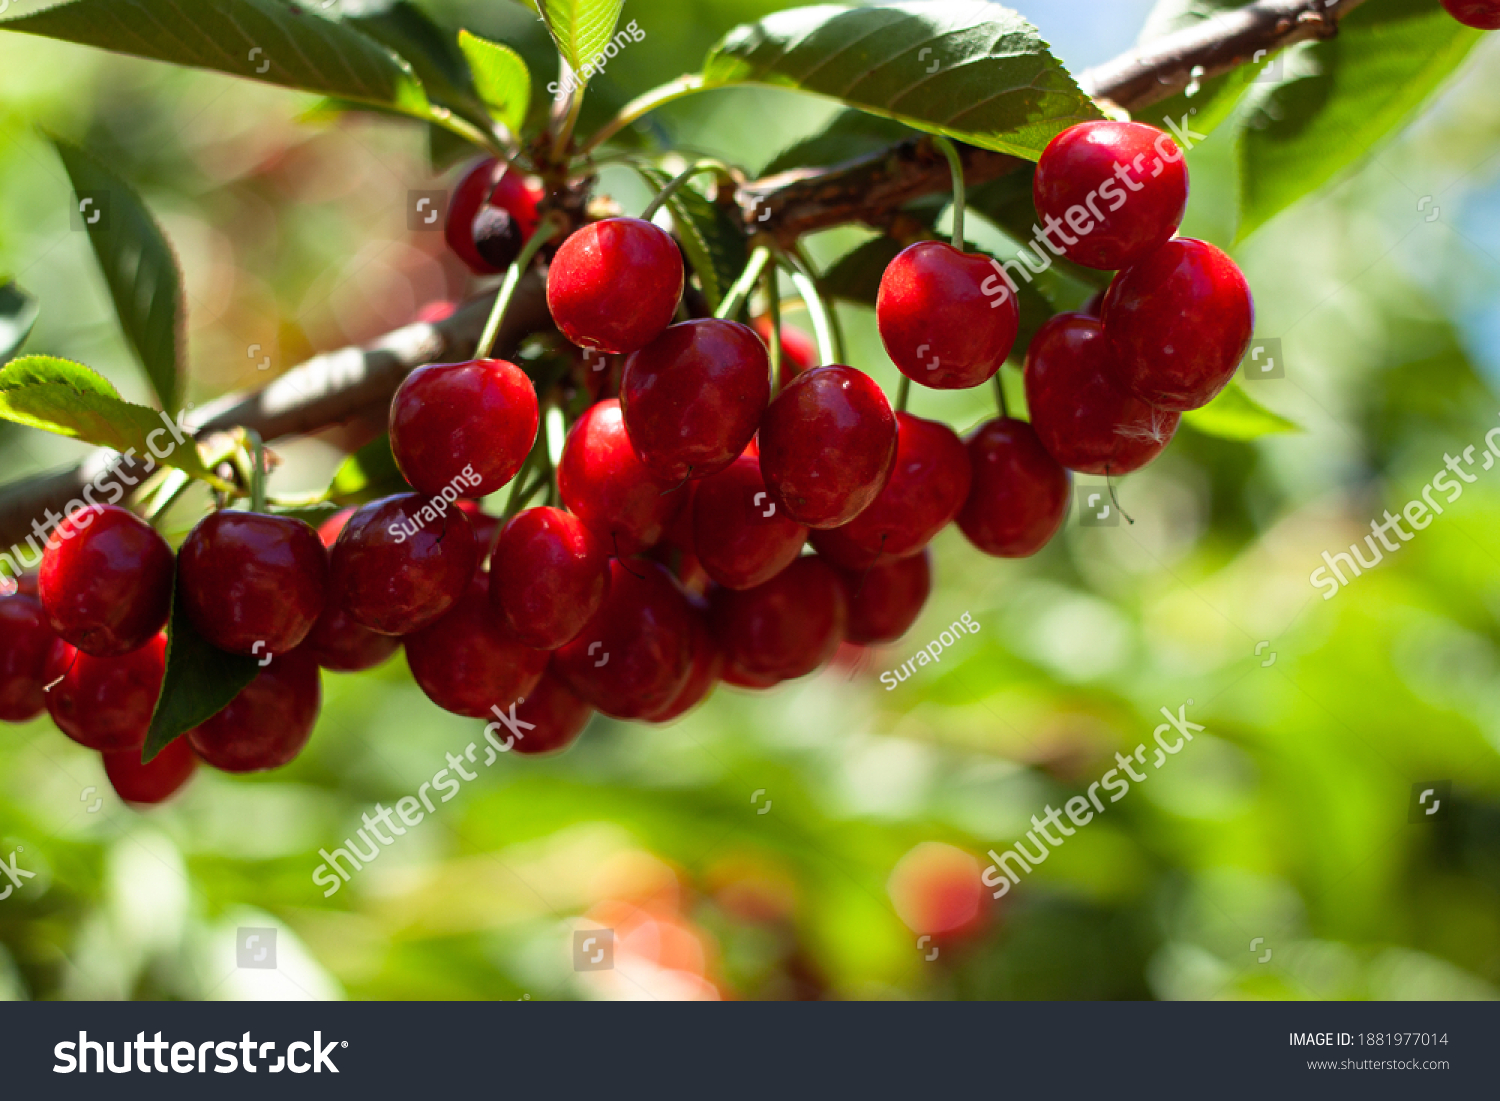 Red ripe cherries hanging from a cherry tree branch with Green bokeh out of focus background from nature forest. #1881977014